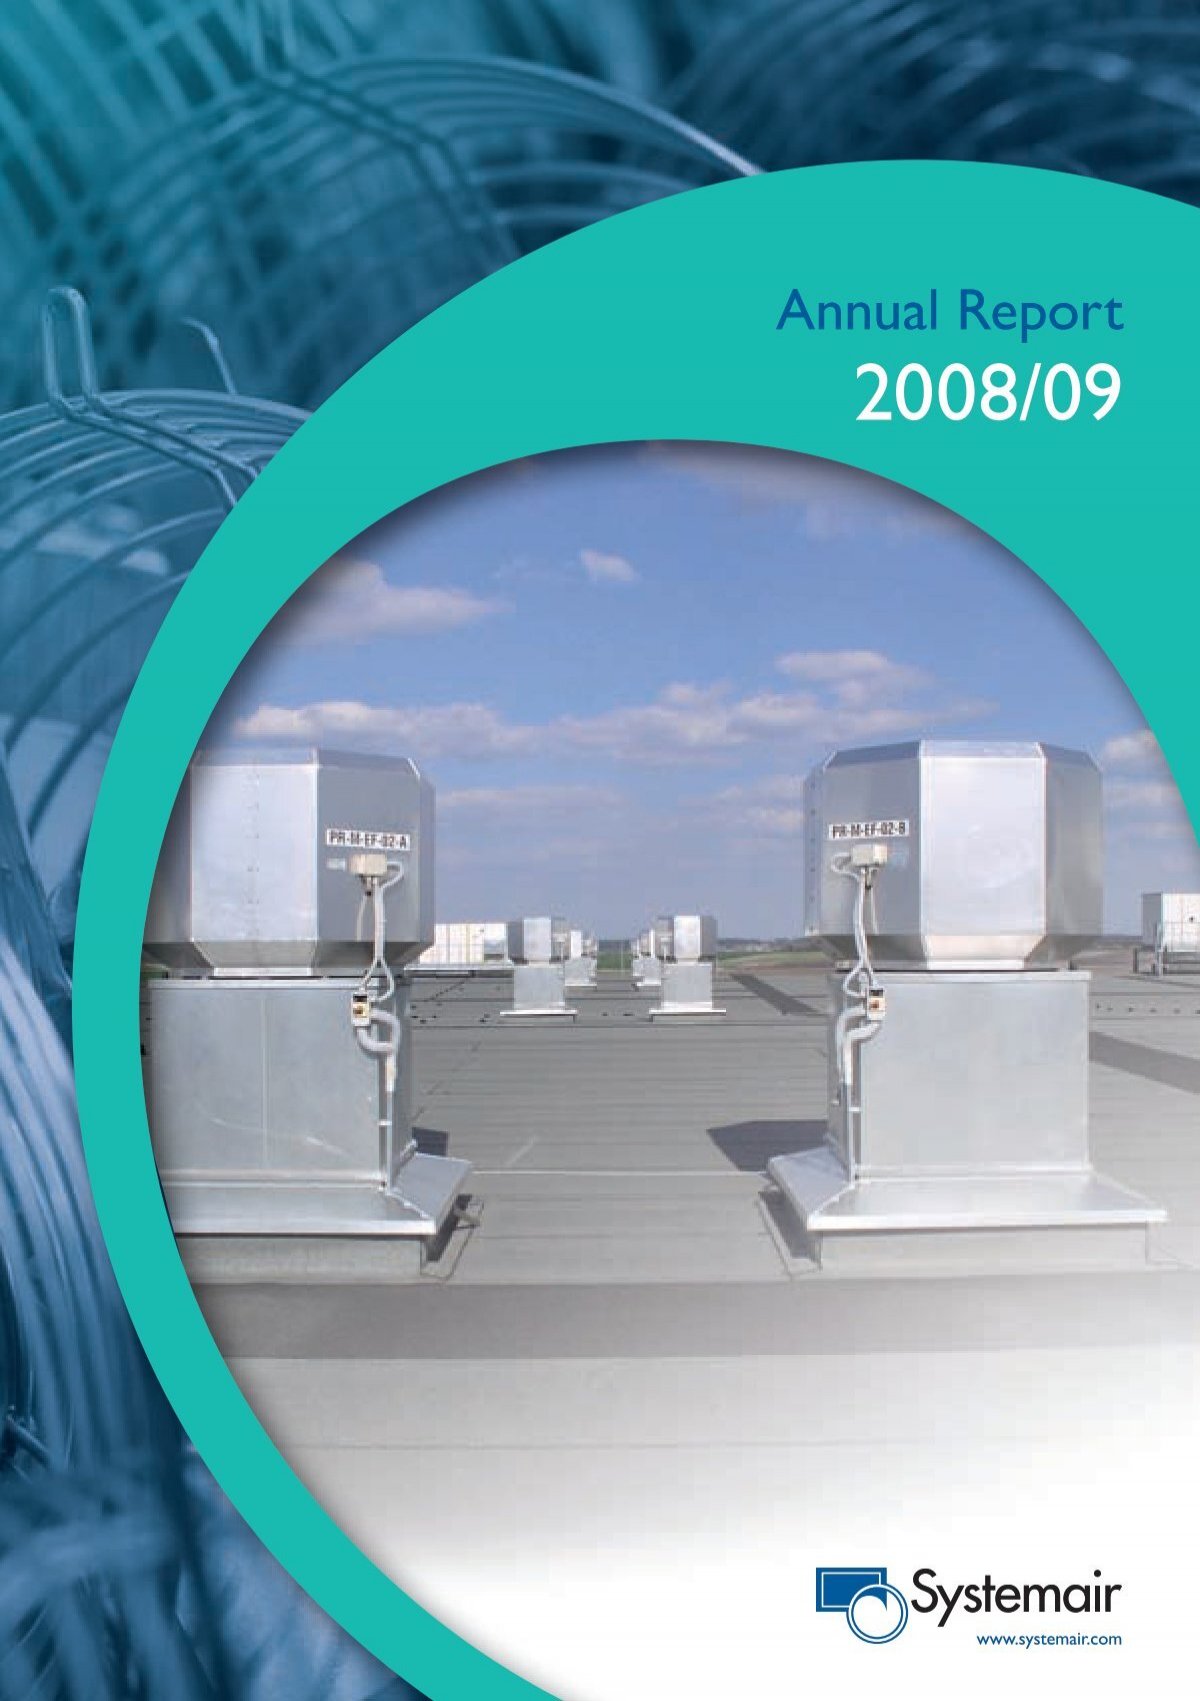 Annual Report 2008 2009 Pdf 6 Mb Systemair